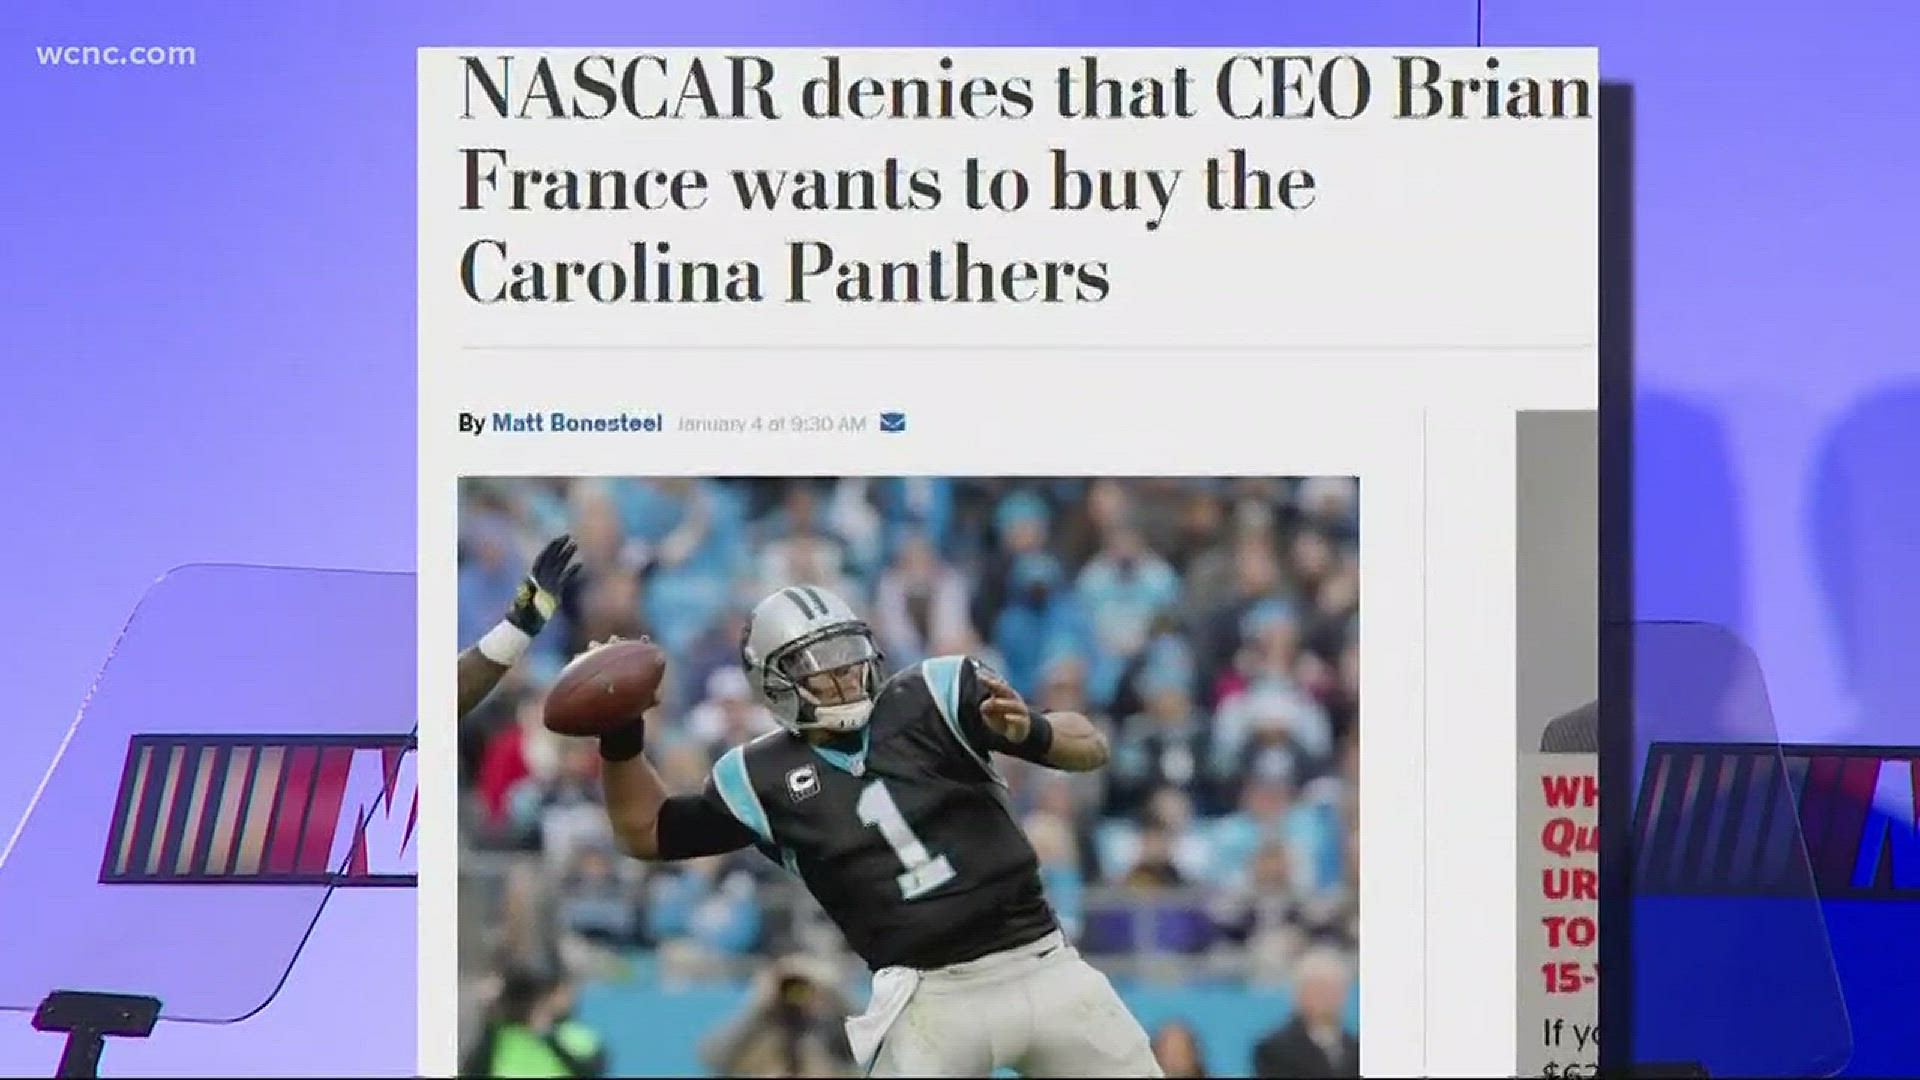 In Thursday morning?s edition of the Washington Post, the Post reported that in 2005 Magic Johnson said he talked with France about joining forces to bring a pro football team to Los Angeles.